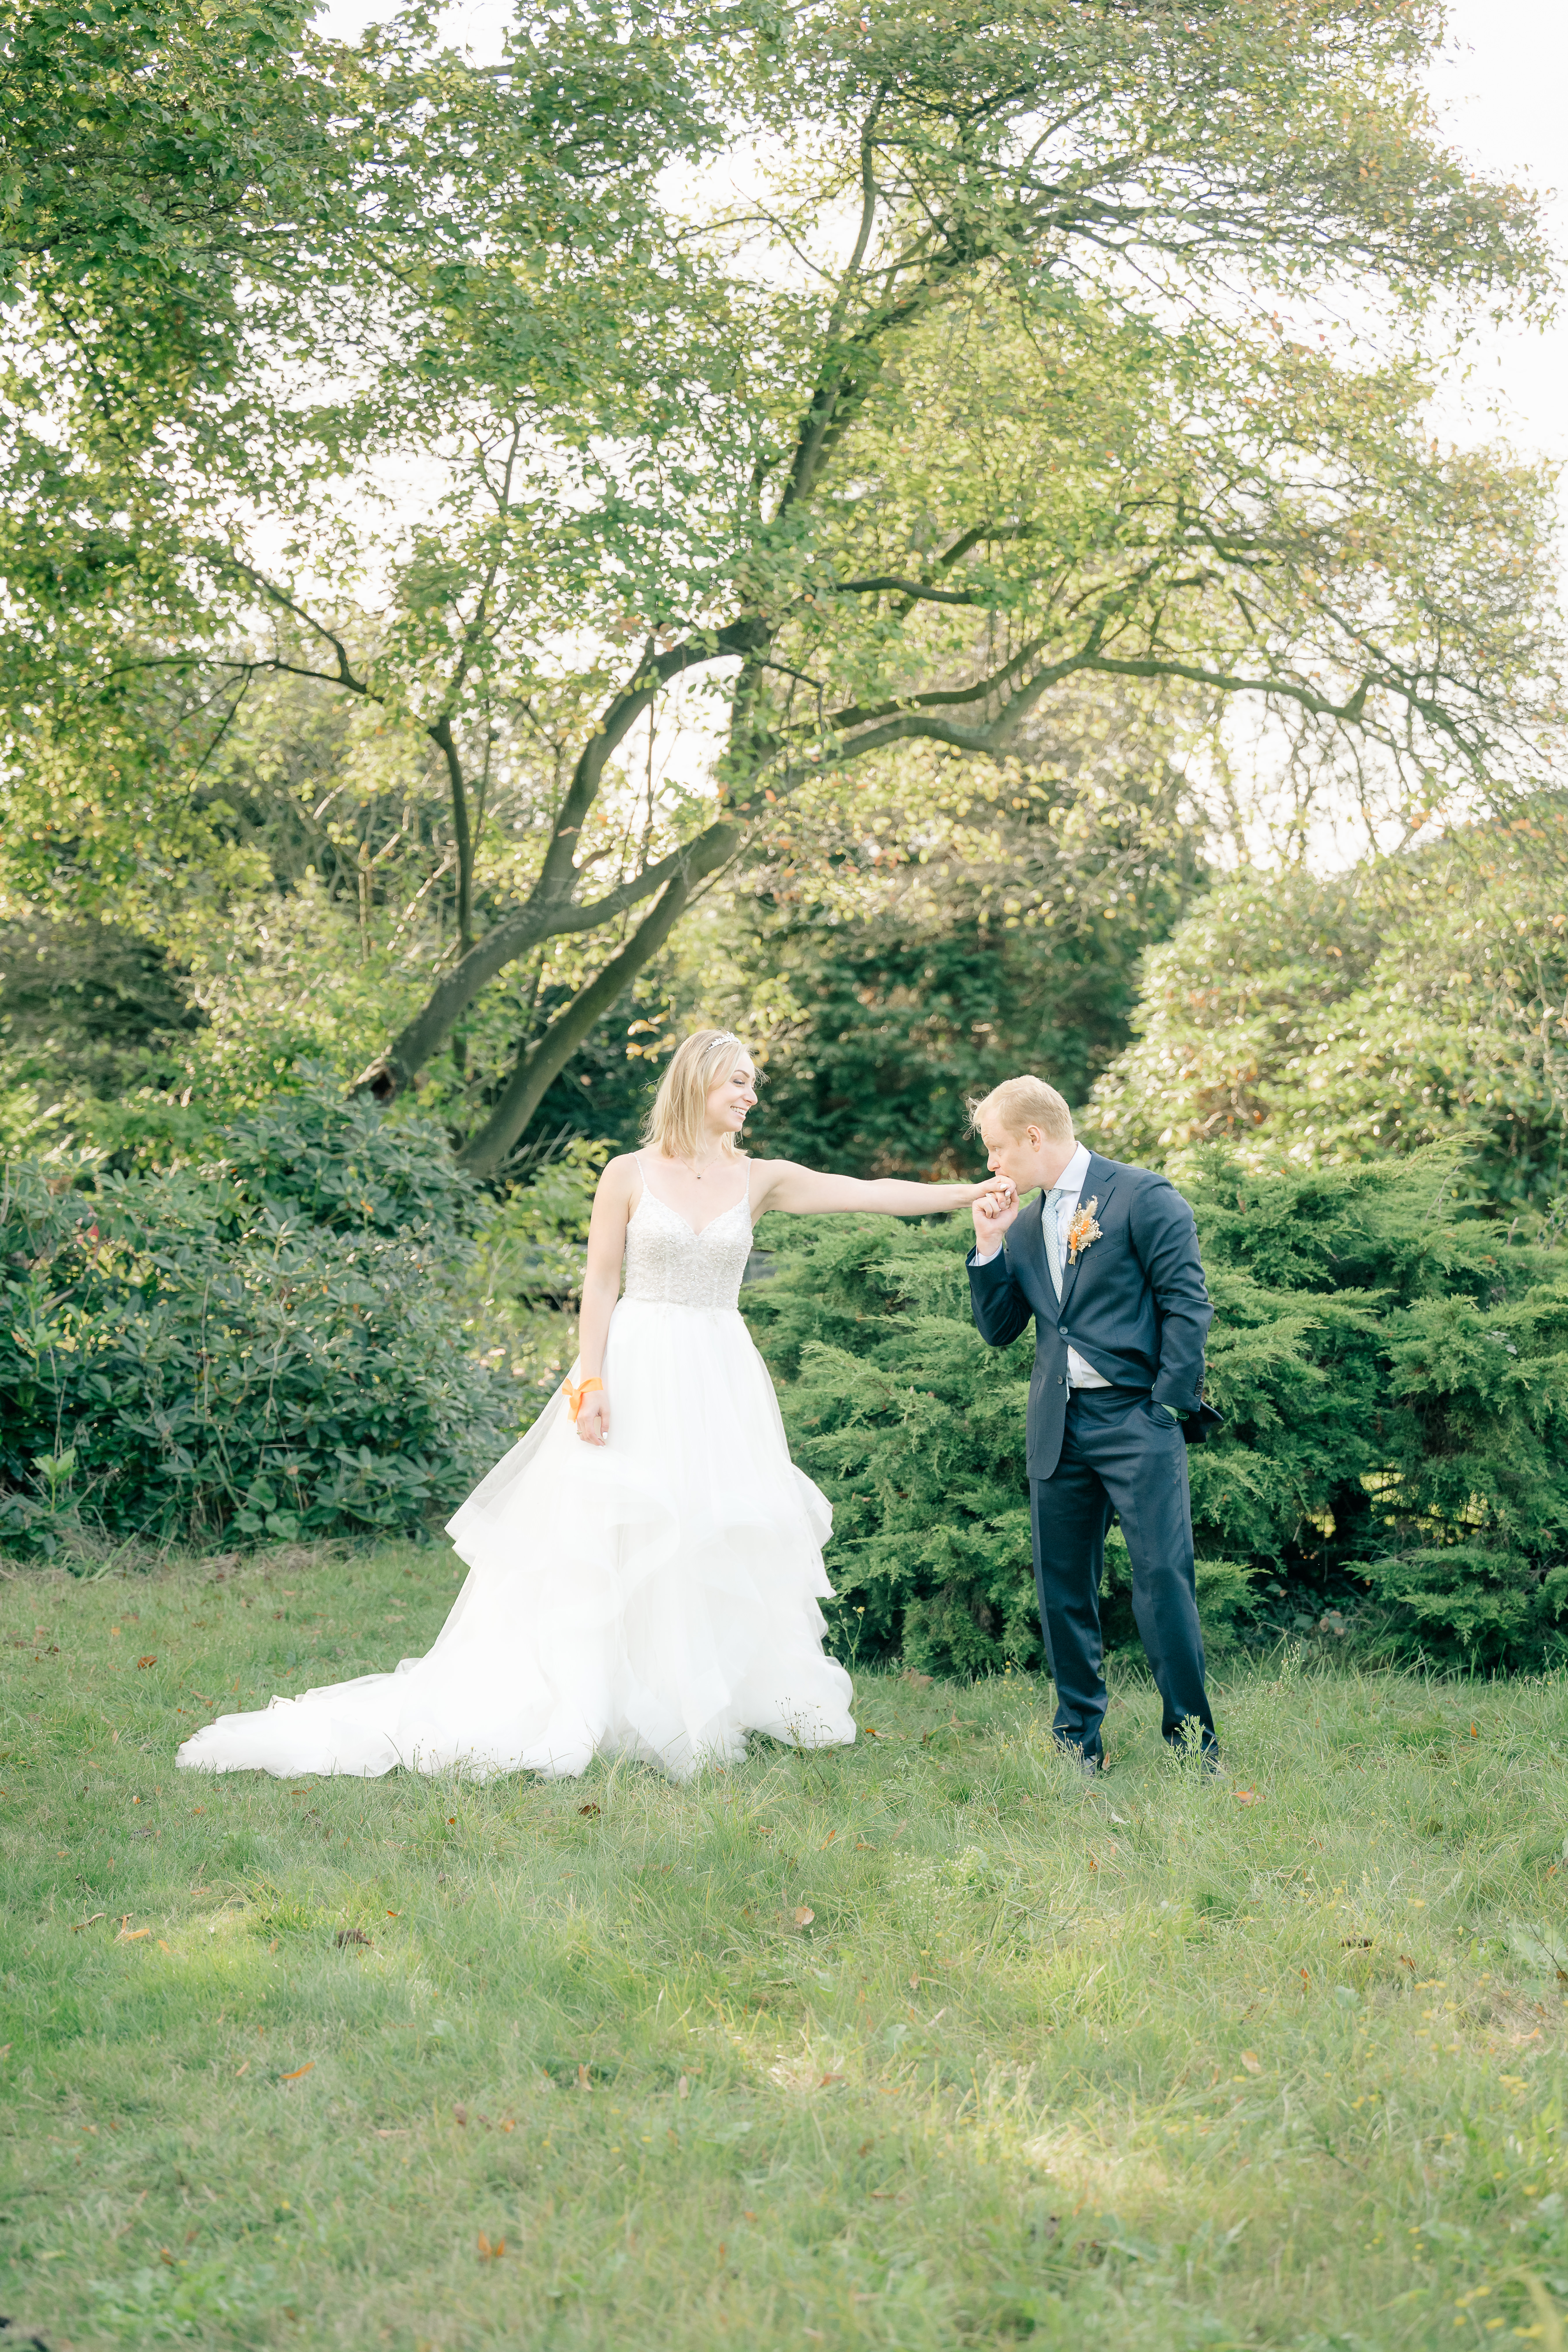 A bride and groom stand arm distance apart in a garden and the groom lifts the bride's hand to kiss it